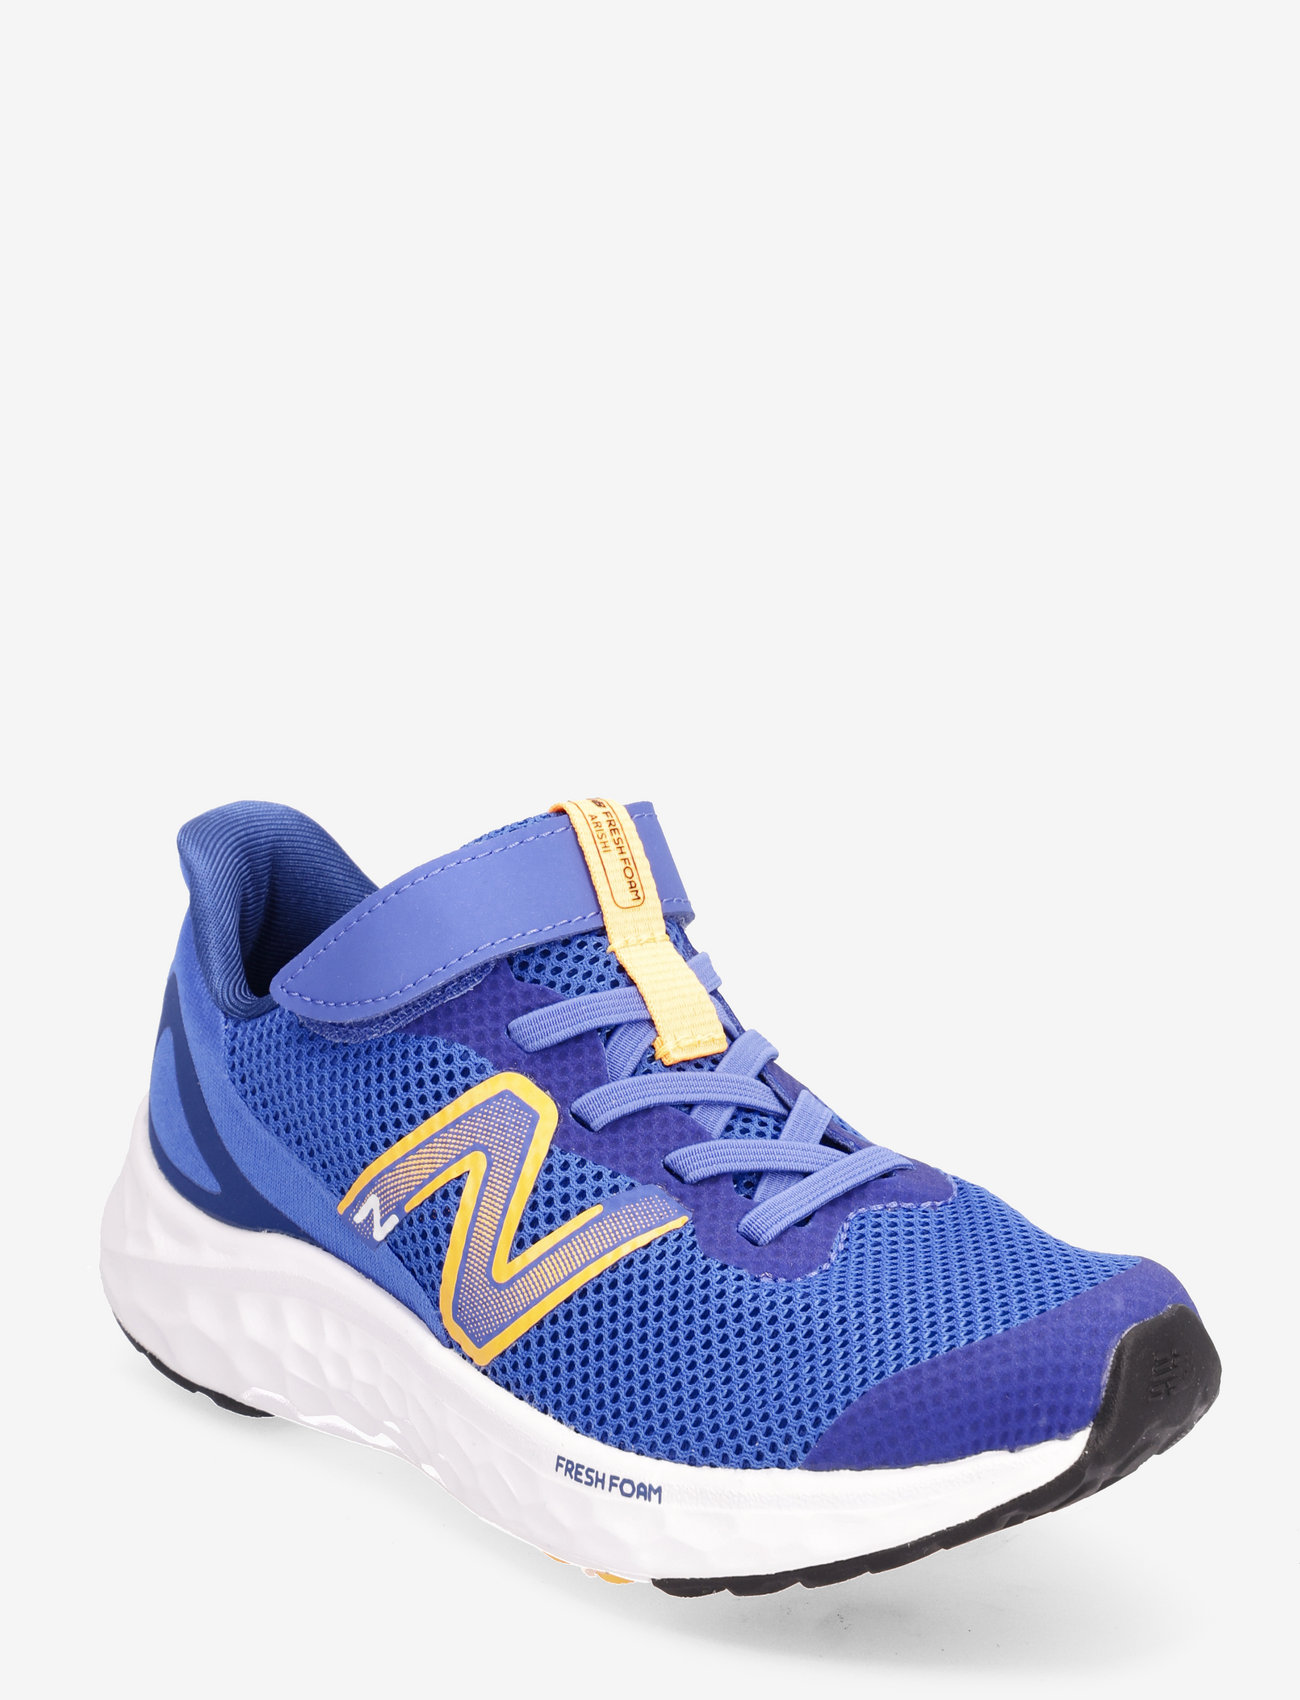 New Balance - Fresh Foam Arishi v4 Bungee Lace with Hook and Loop Top Stra - kinder - marine blue - 0